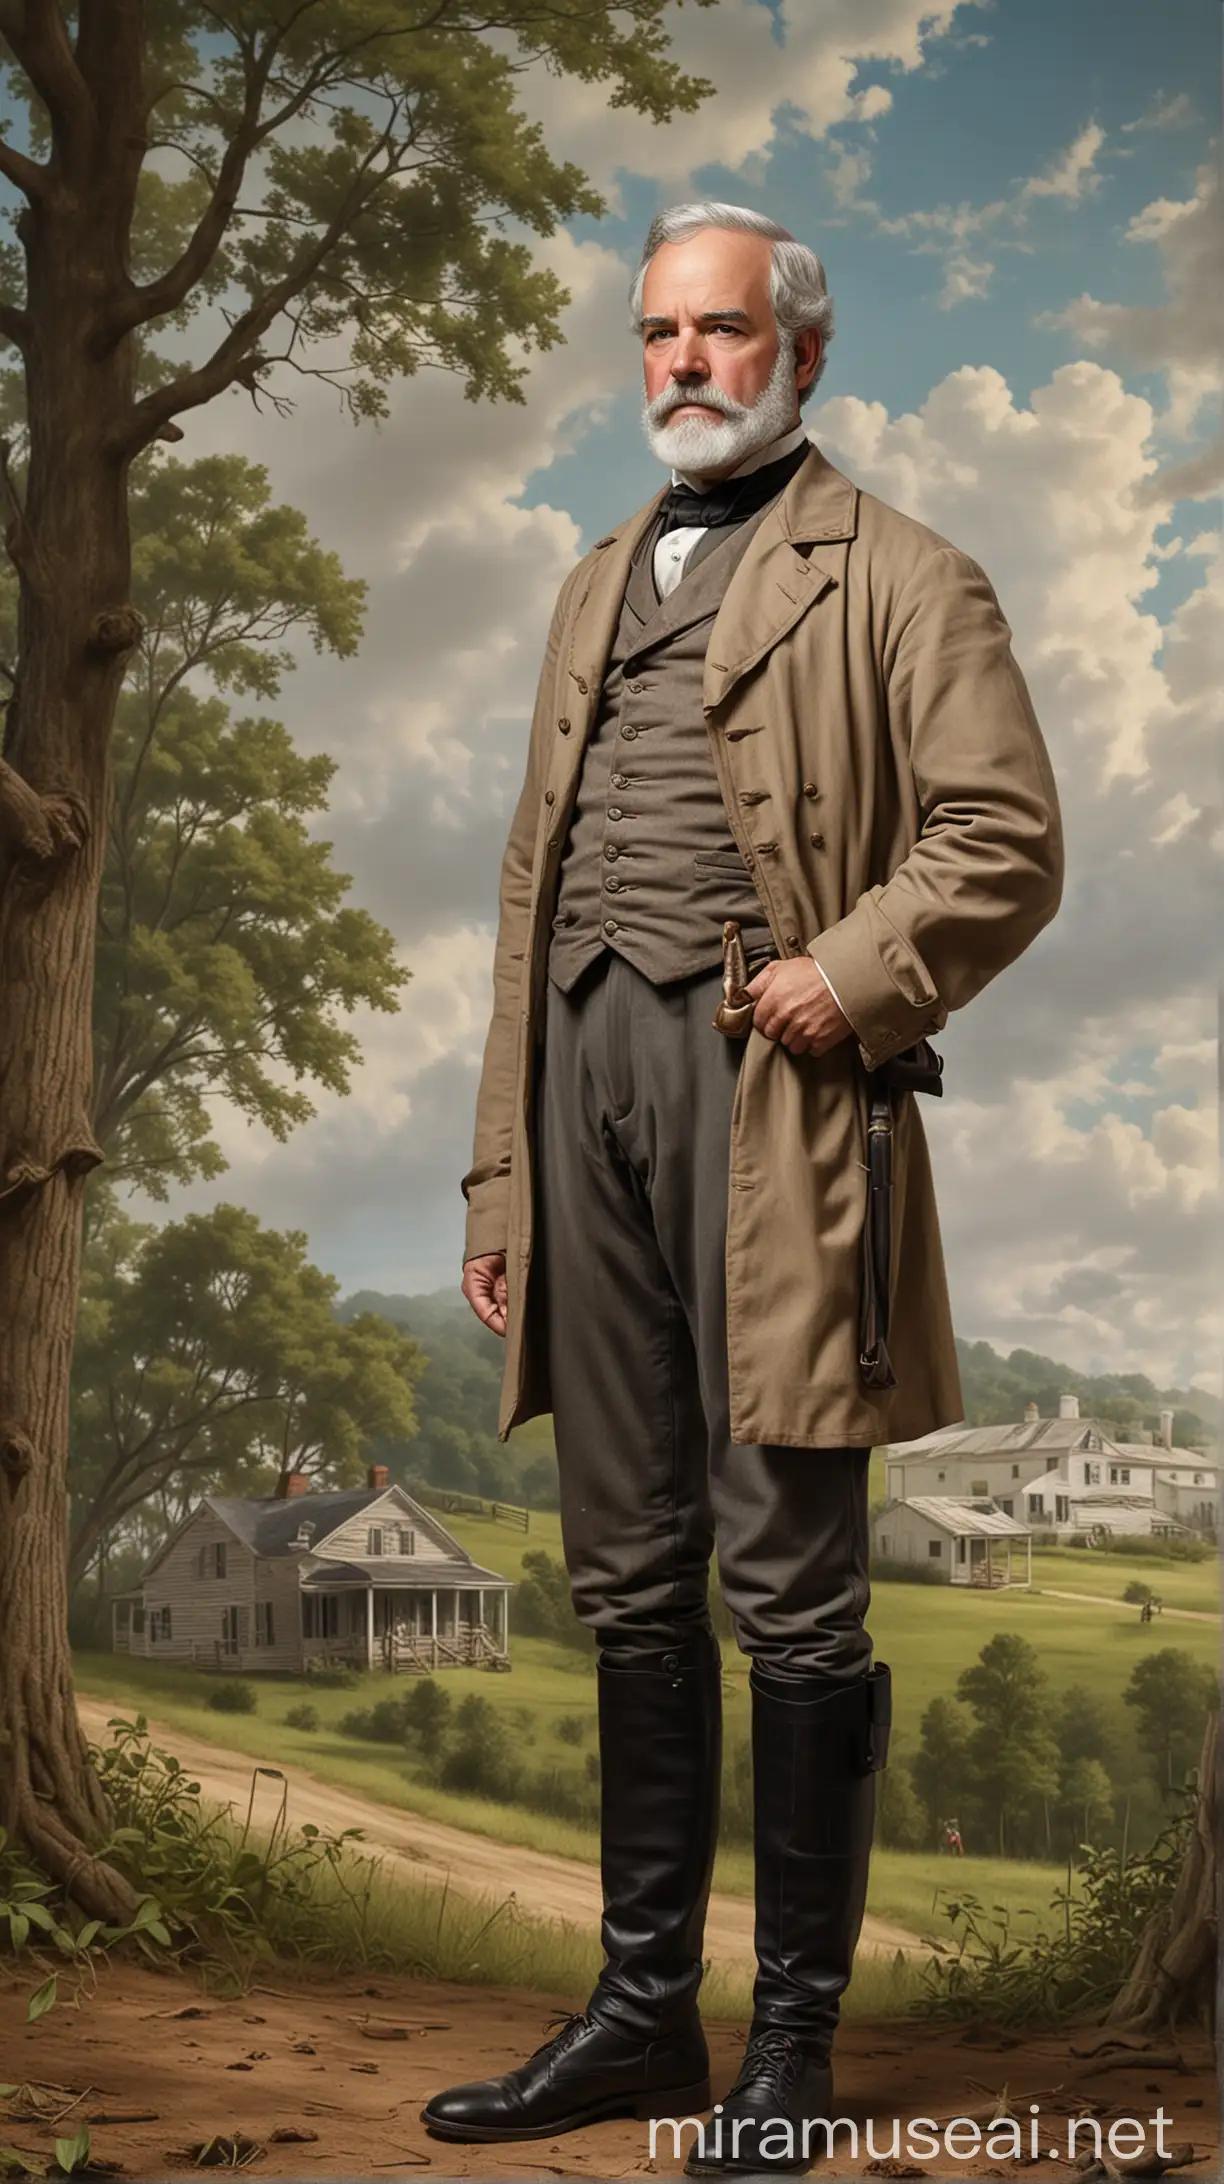 Illustrate a young Robert E. Lee, dressed in early 19th-century attire, perhaps with a backdrop of rural Virginia. hyper realistic